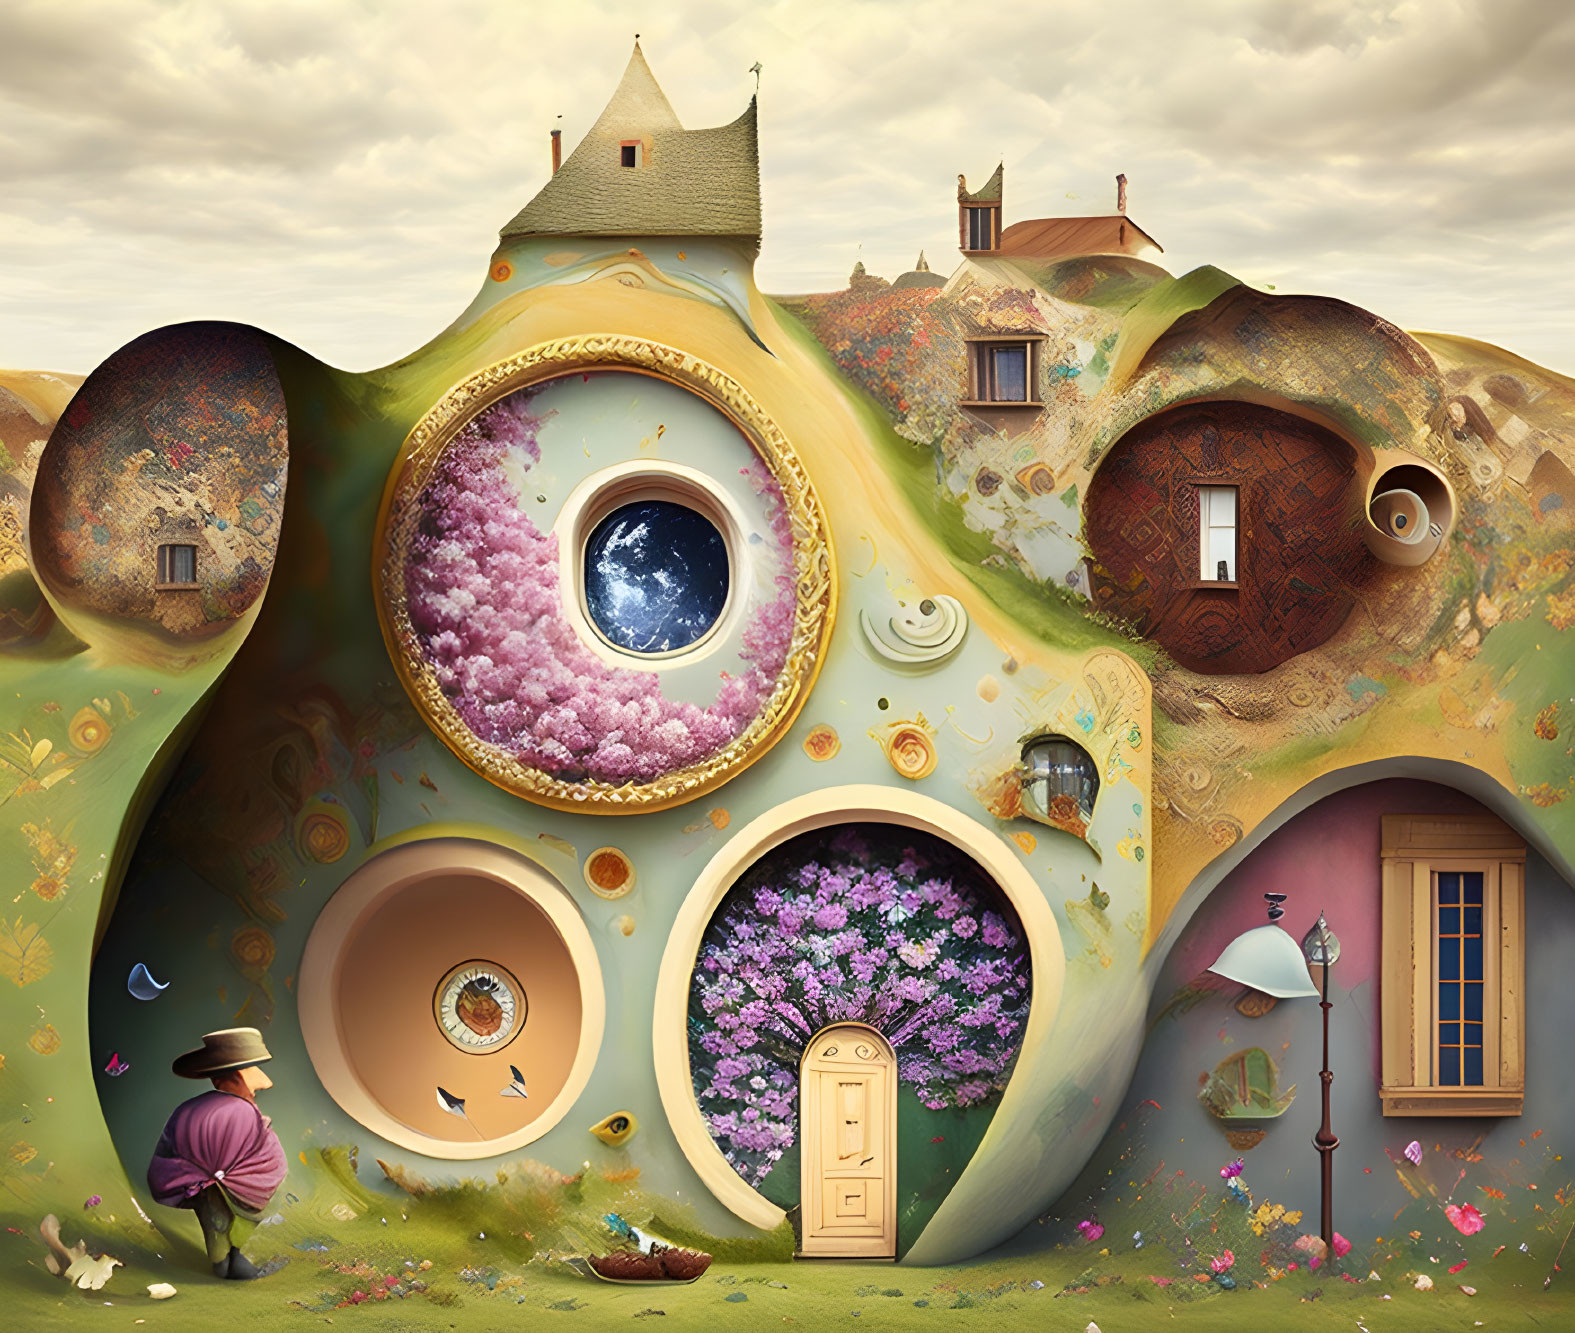 Whimsical surreal landscape with organic buildings and man with hat